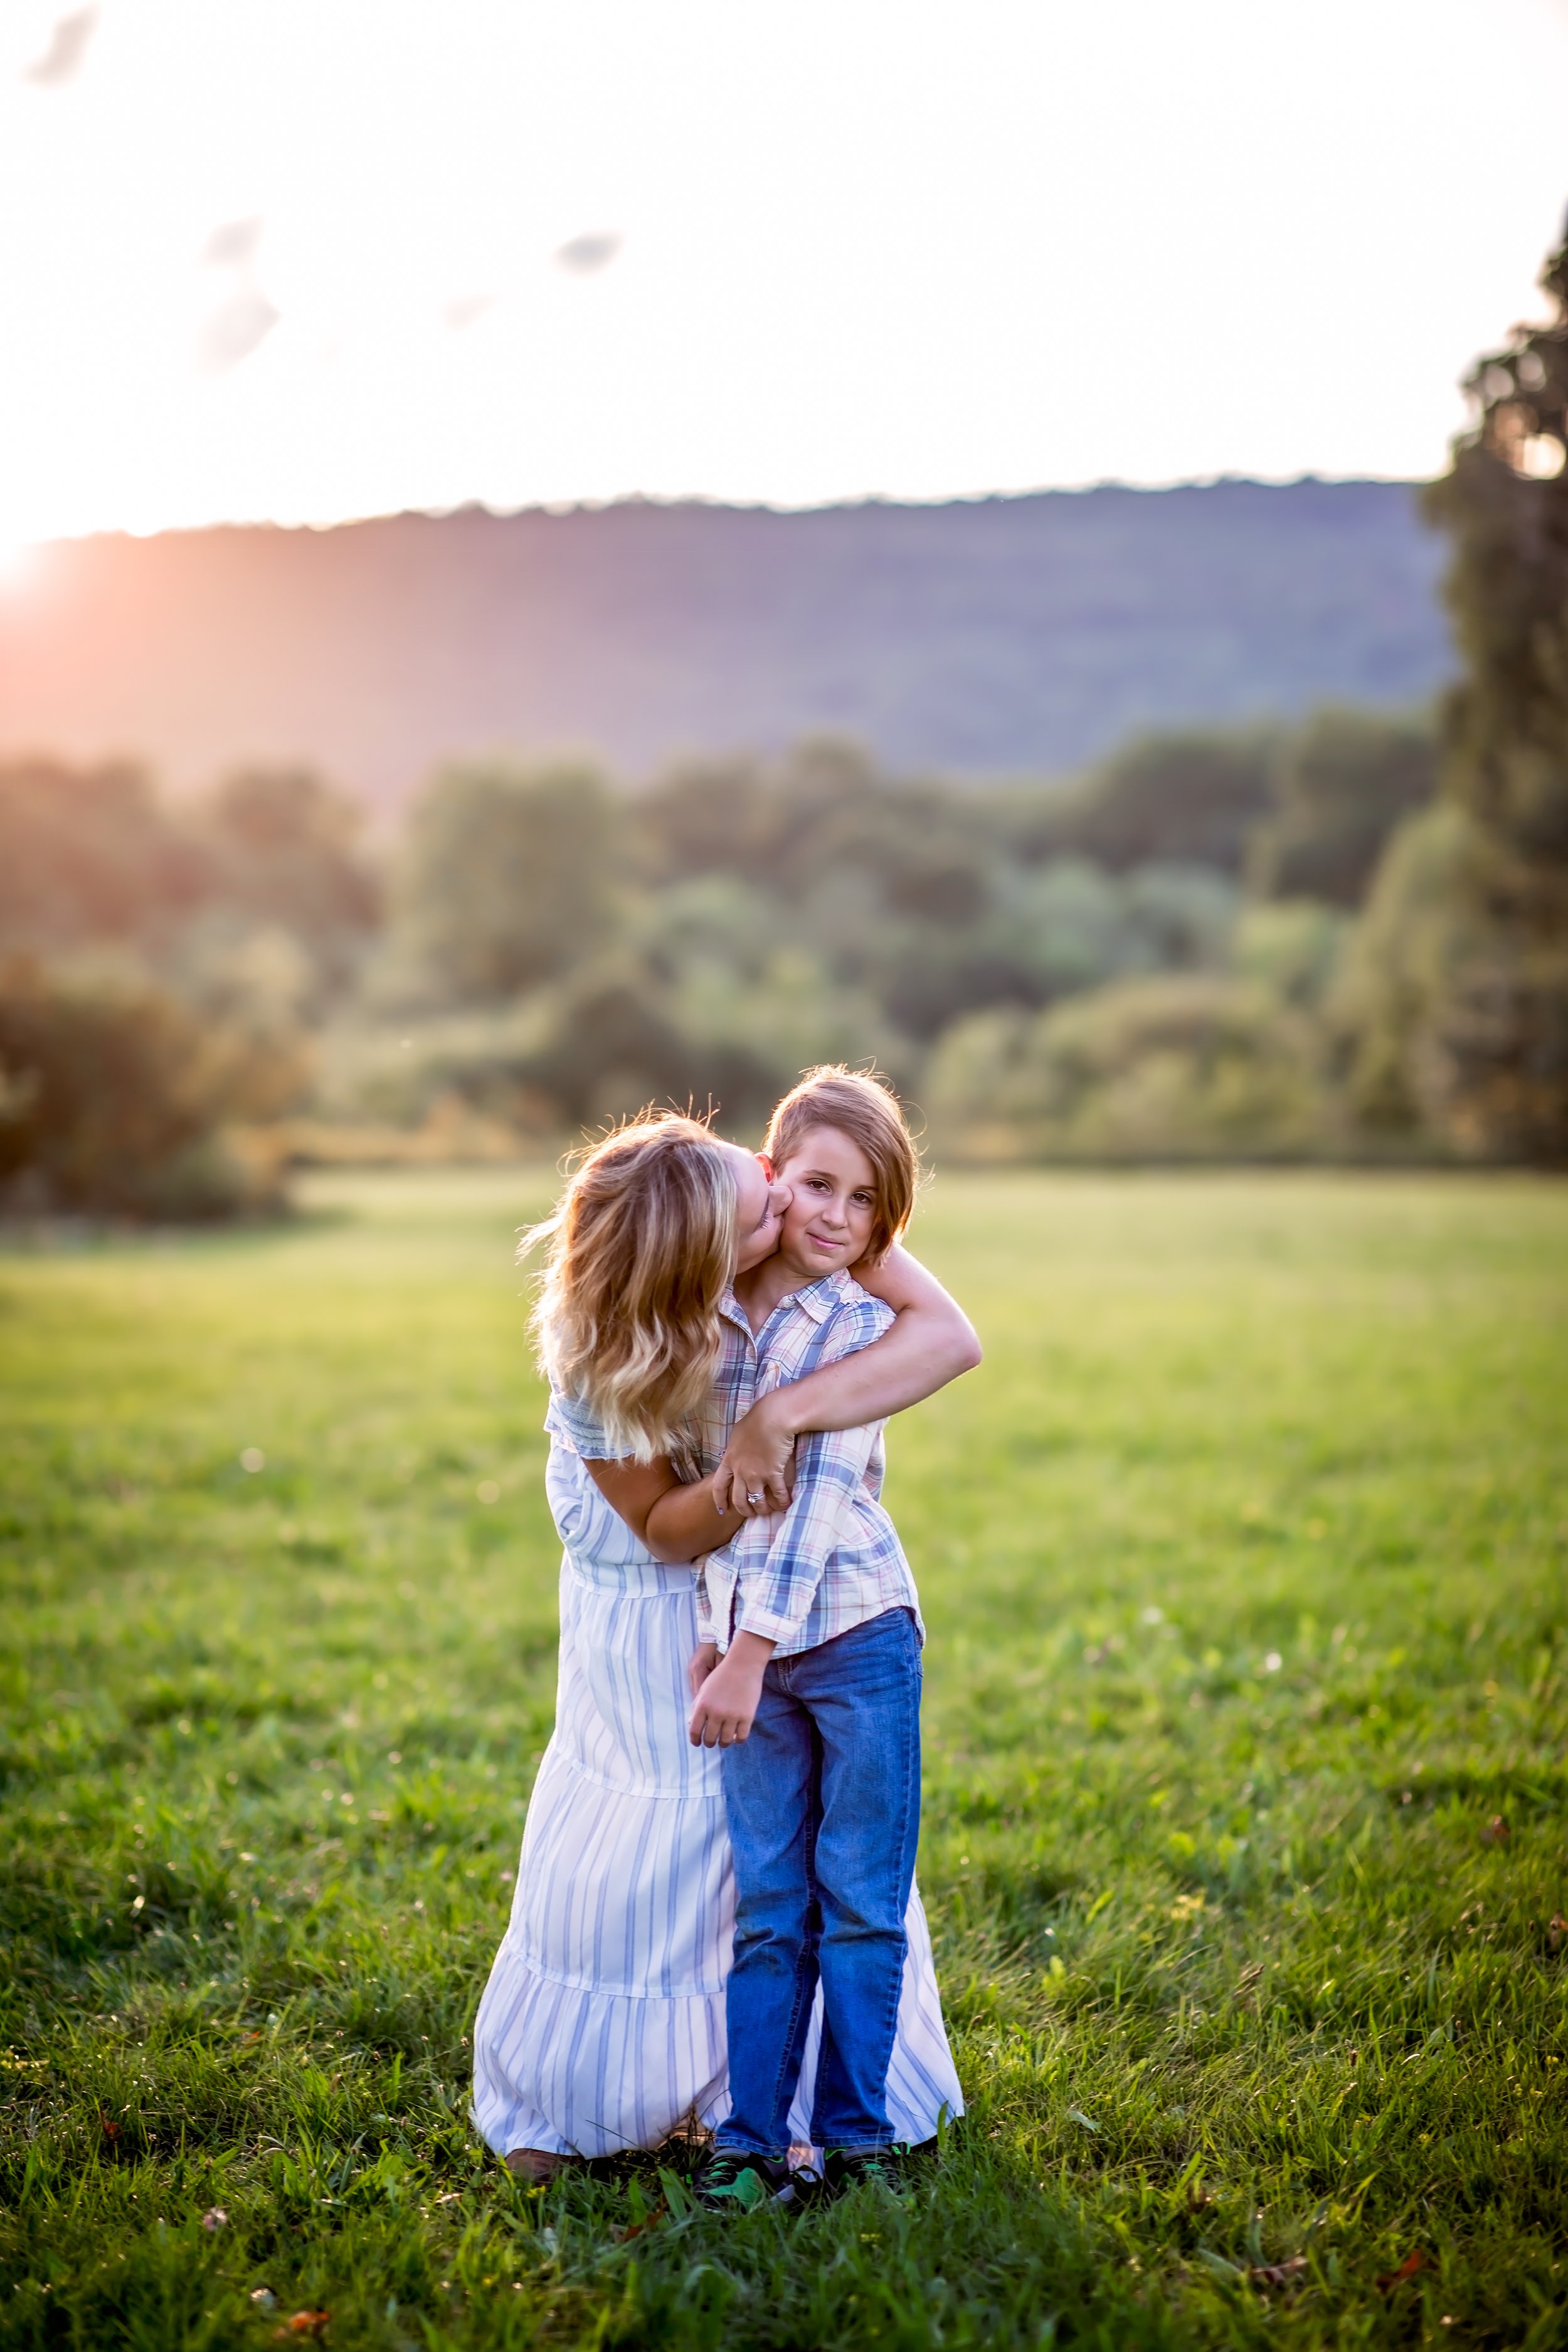  Mom in white dress wraps her arms around her young son and kisses his cheek in a pretty New Jersey field 